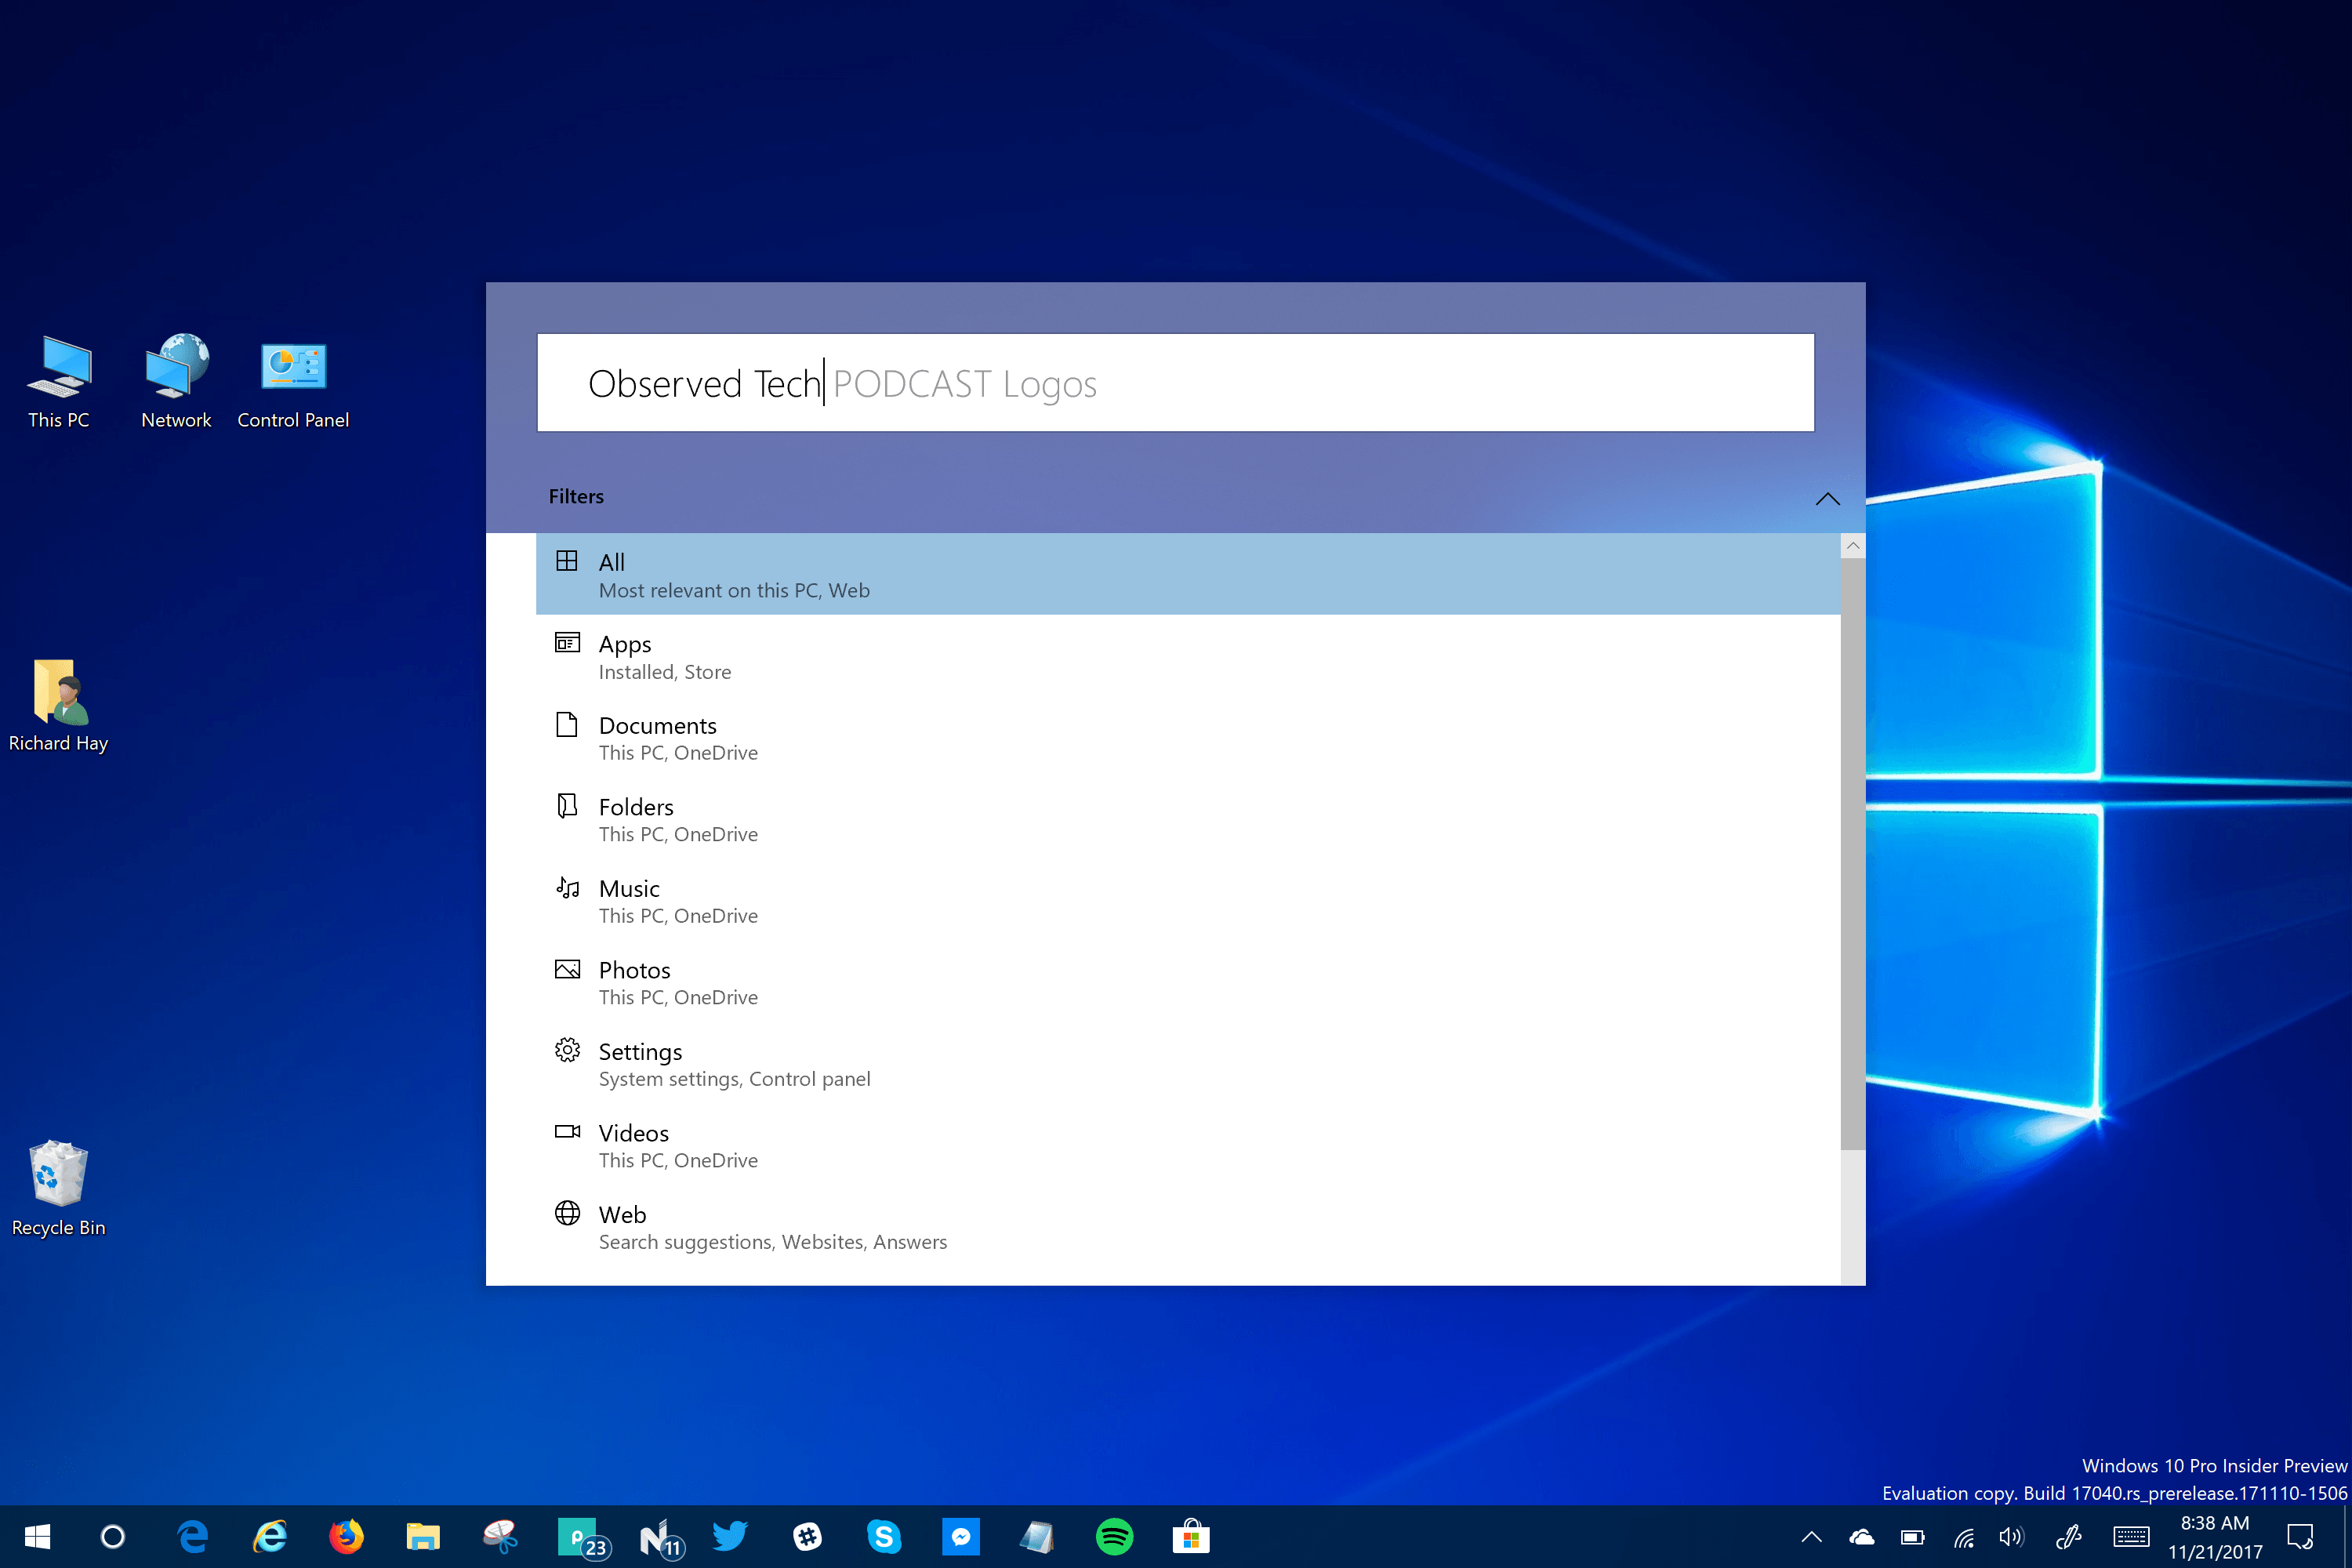 New Cortana Search Interface Surfaces in Windows 10 RS4 Build 17040